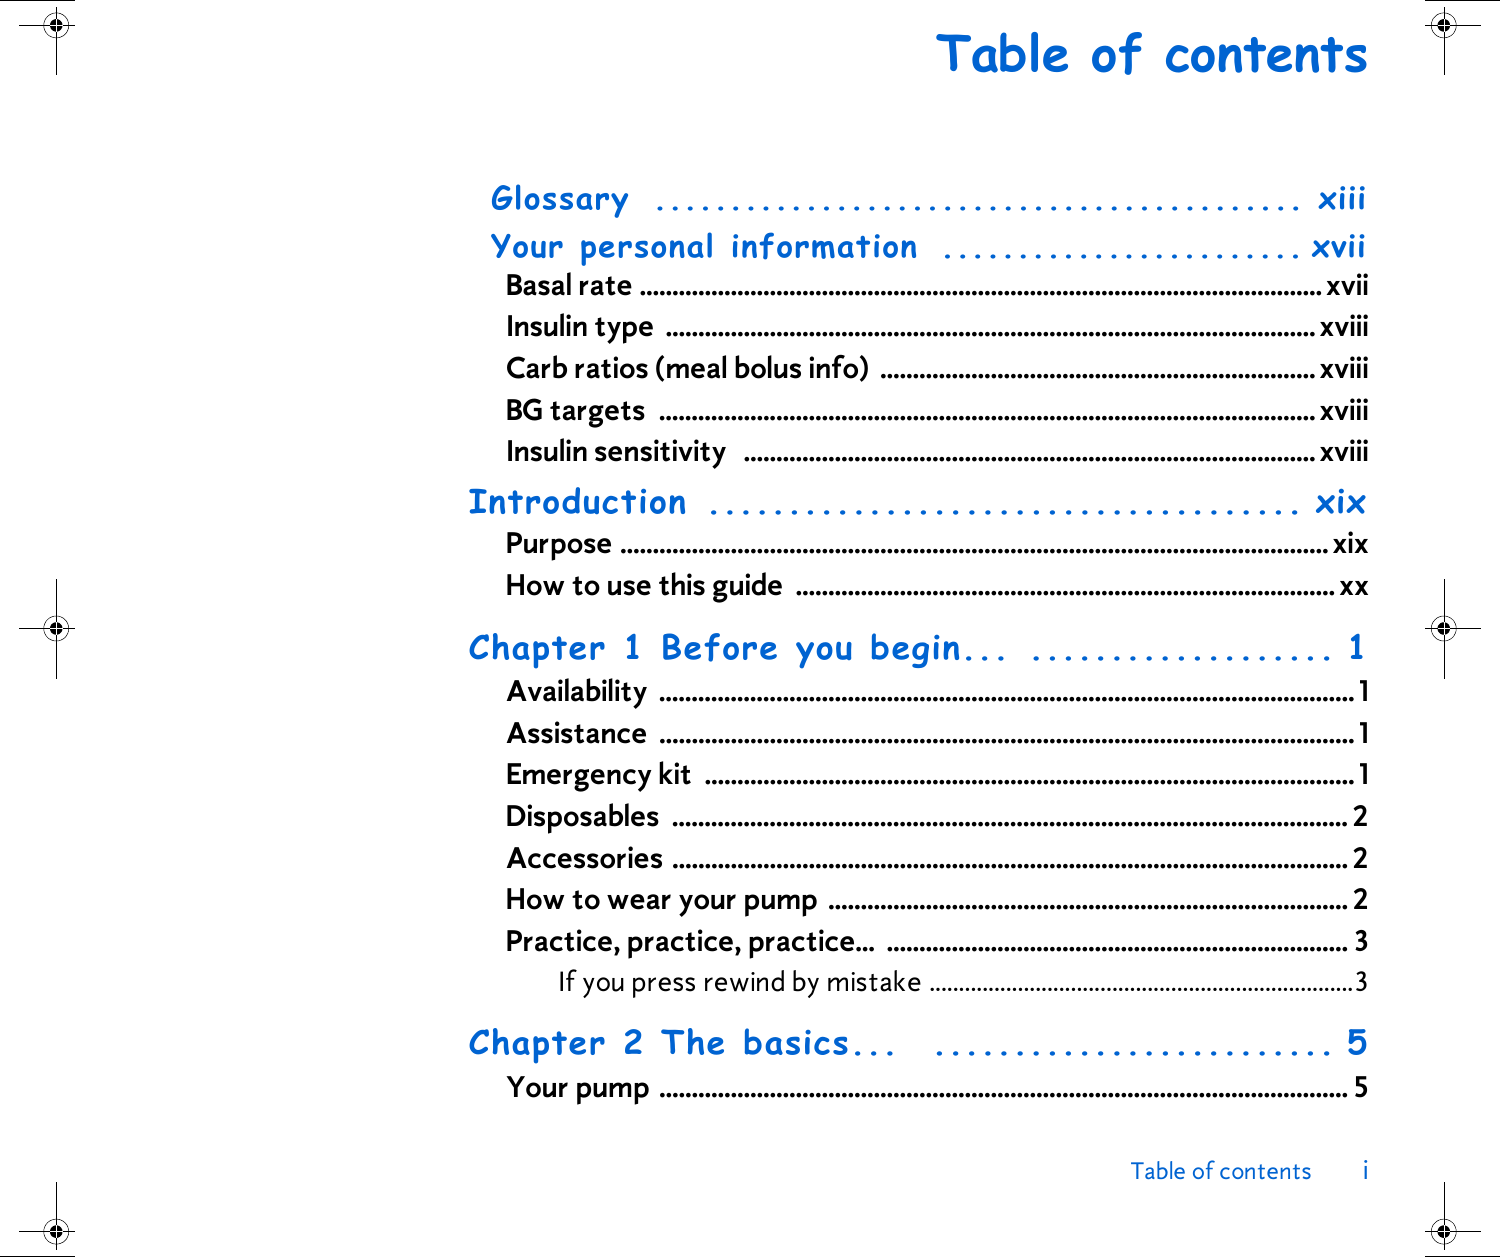 Table of contents iTable of contentsGlossary ........................................... xiiiYour personal information  ........................ xviiBasal rate ......................................................................................................... xviiInsulin type  ....................................................................................................xviiiCarb ratios (meal bolus info)  ...................................................................xviiiBG targets  .....................................................................................................xviiiInsulin sensitivity   ........................................................................................xviiiIntroduction ..................................... xixPurpose .............................................................................................................xixHow to use this guide  ...................................................................................xxChapter 1 Before you begin... ................... 1Availability ........................................................................................................... 1Assistance ........................................................................................................... 1Emergency kit  ....................................................................................................1Disposables ........................................................................................................ 2Accessories ........................................................................................................ 2How to wear your pump ................................................................................ 2Practice, practice, practice...  ....................................................................... 3If you press rewind by mistake ........................................................................3Chapter 2 The basics...  ......................... 5Your pump .......................................................................................................... 5